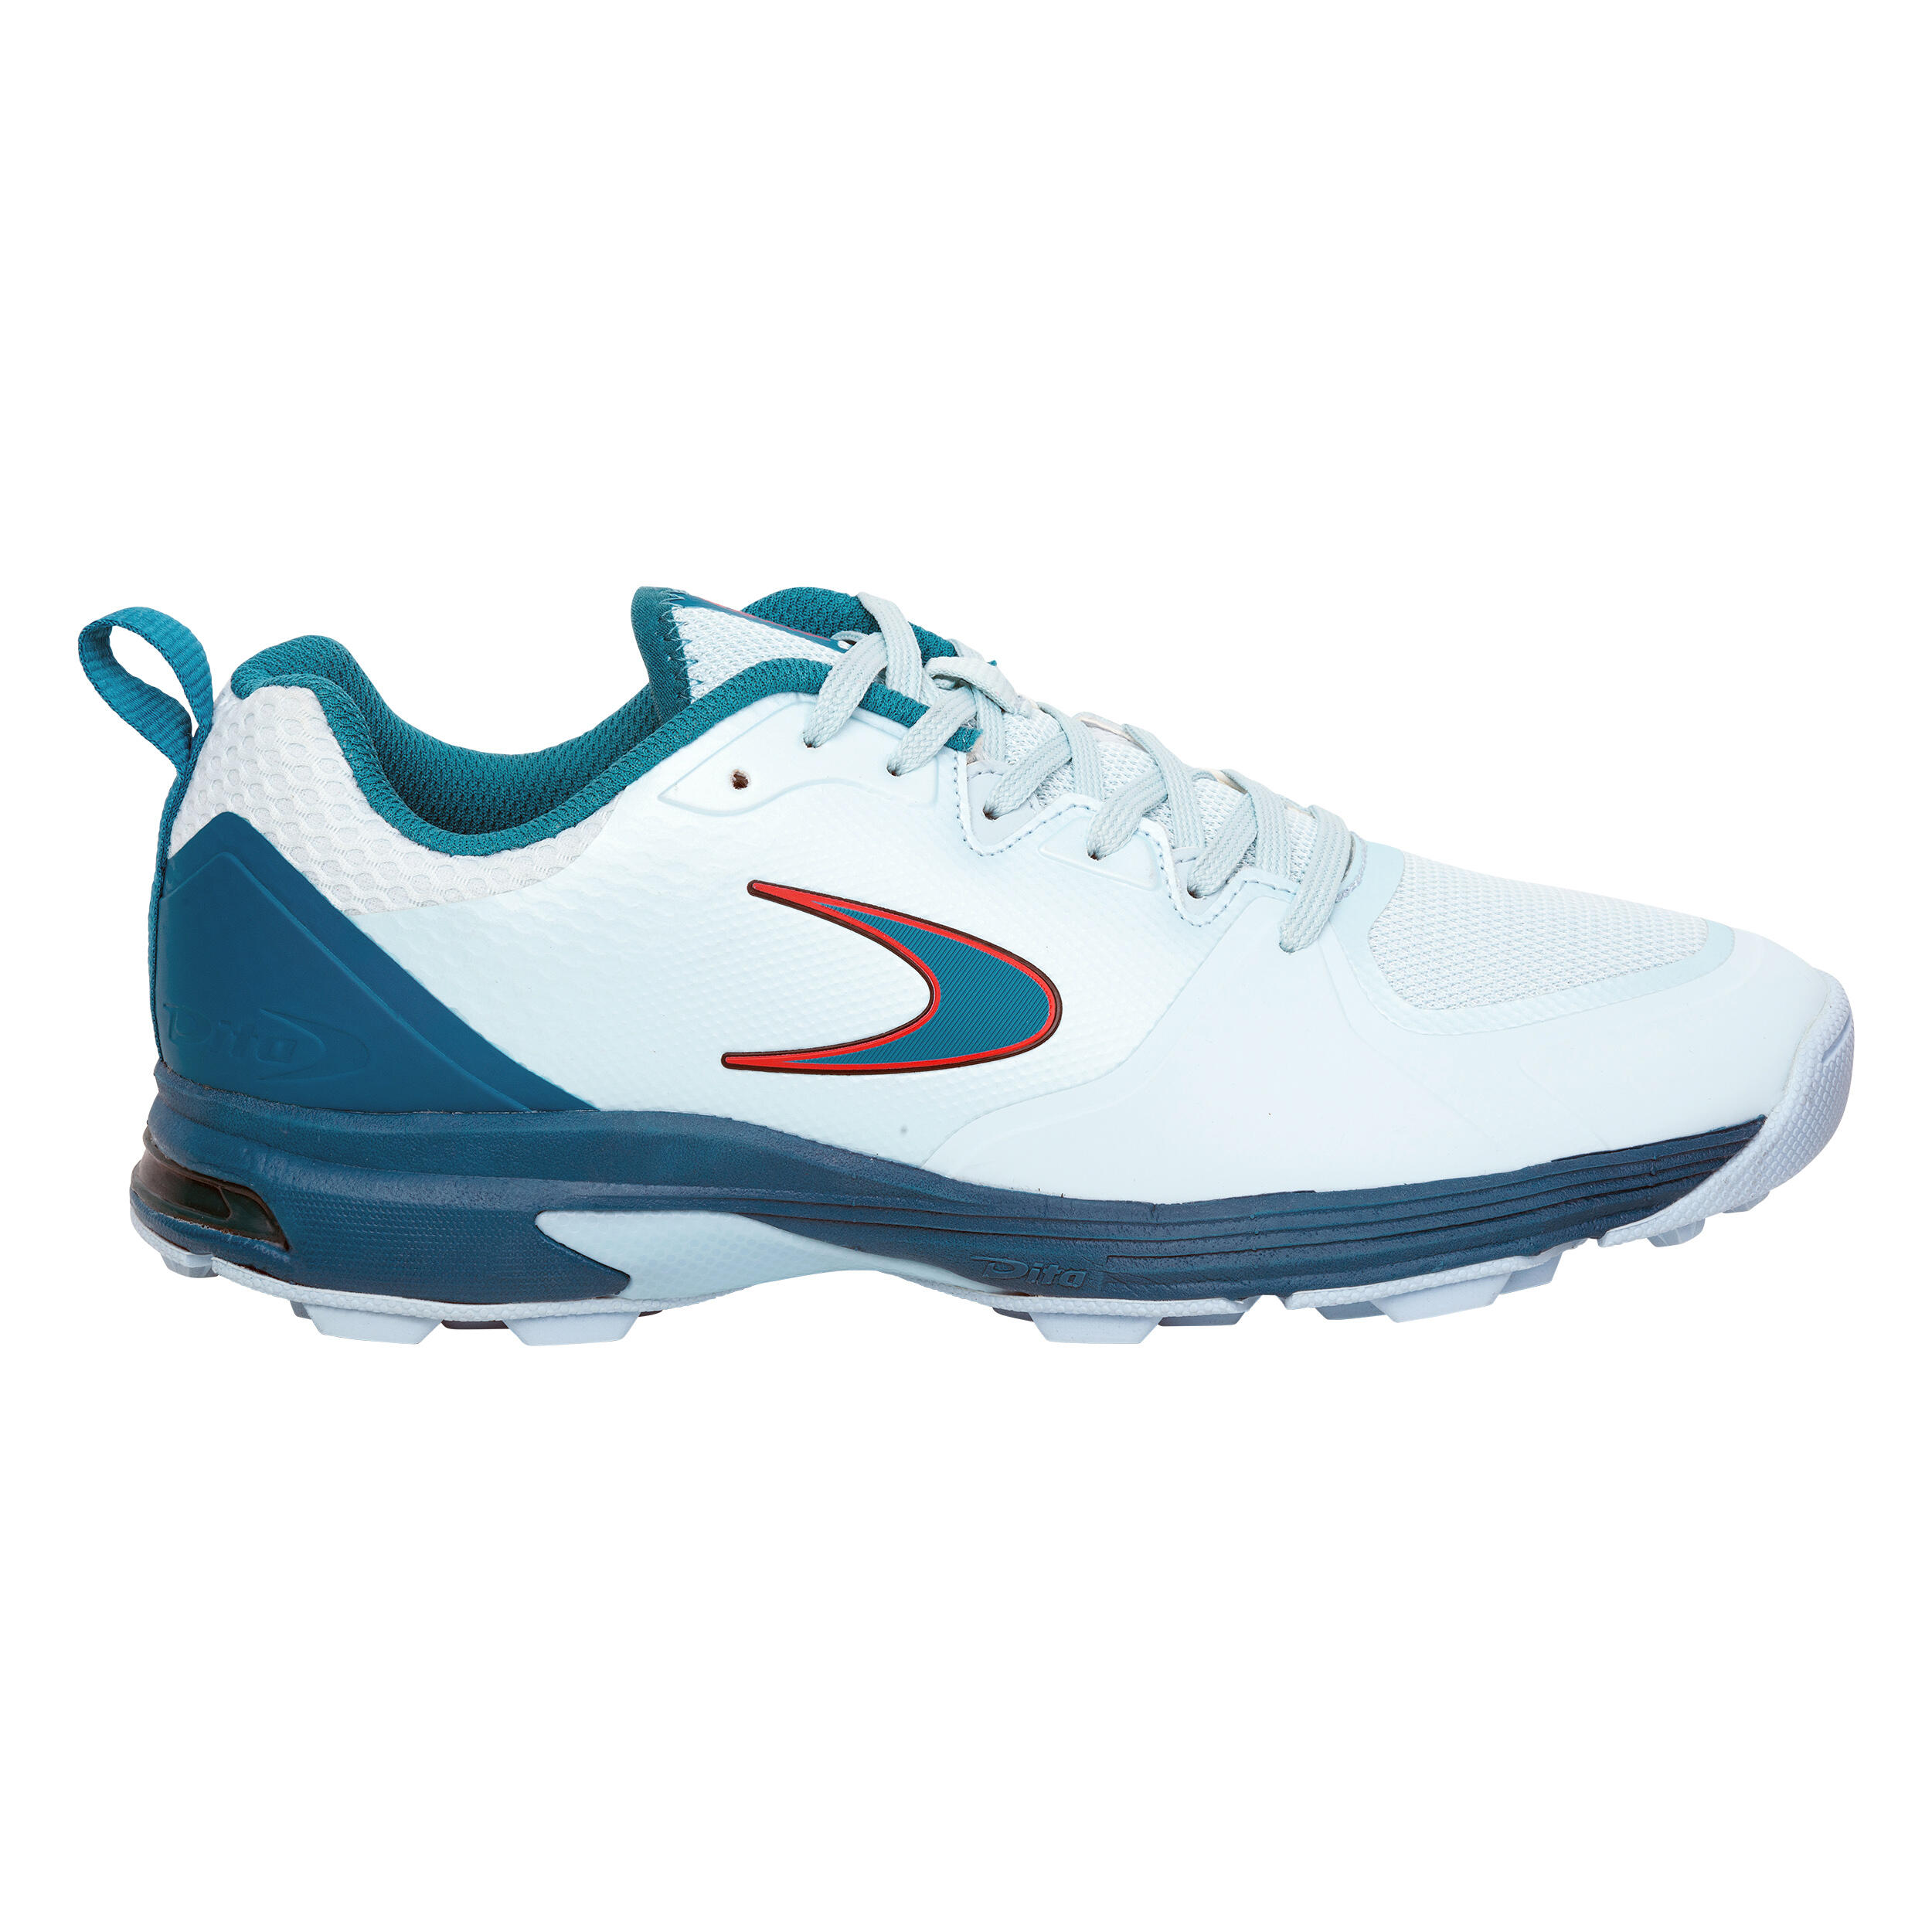 DITA Adult Moderate-Intensity Field Hockey Shoes LGHT 550 - Turquoise